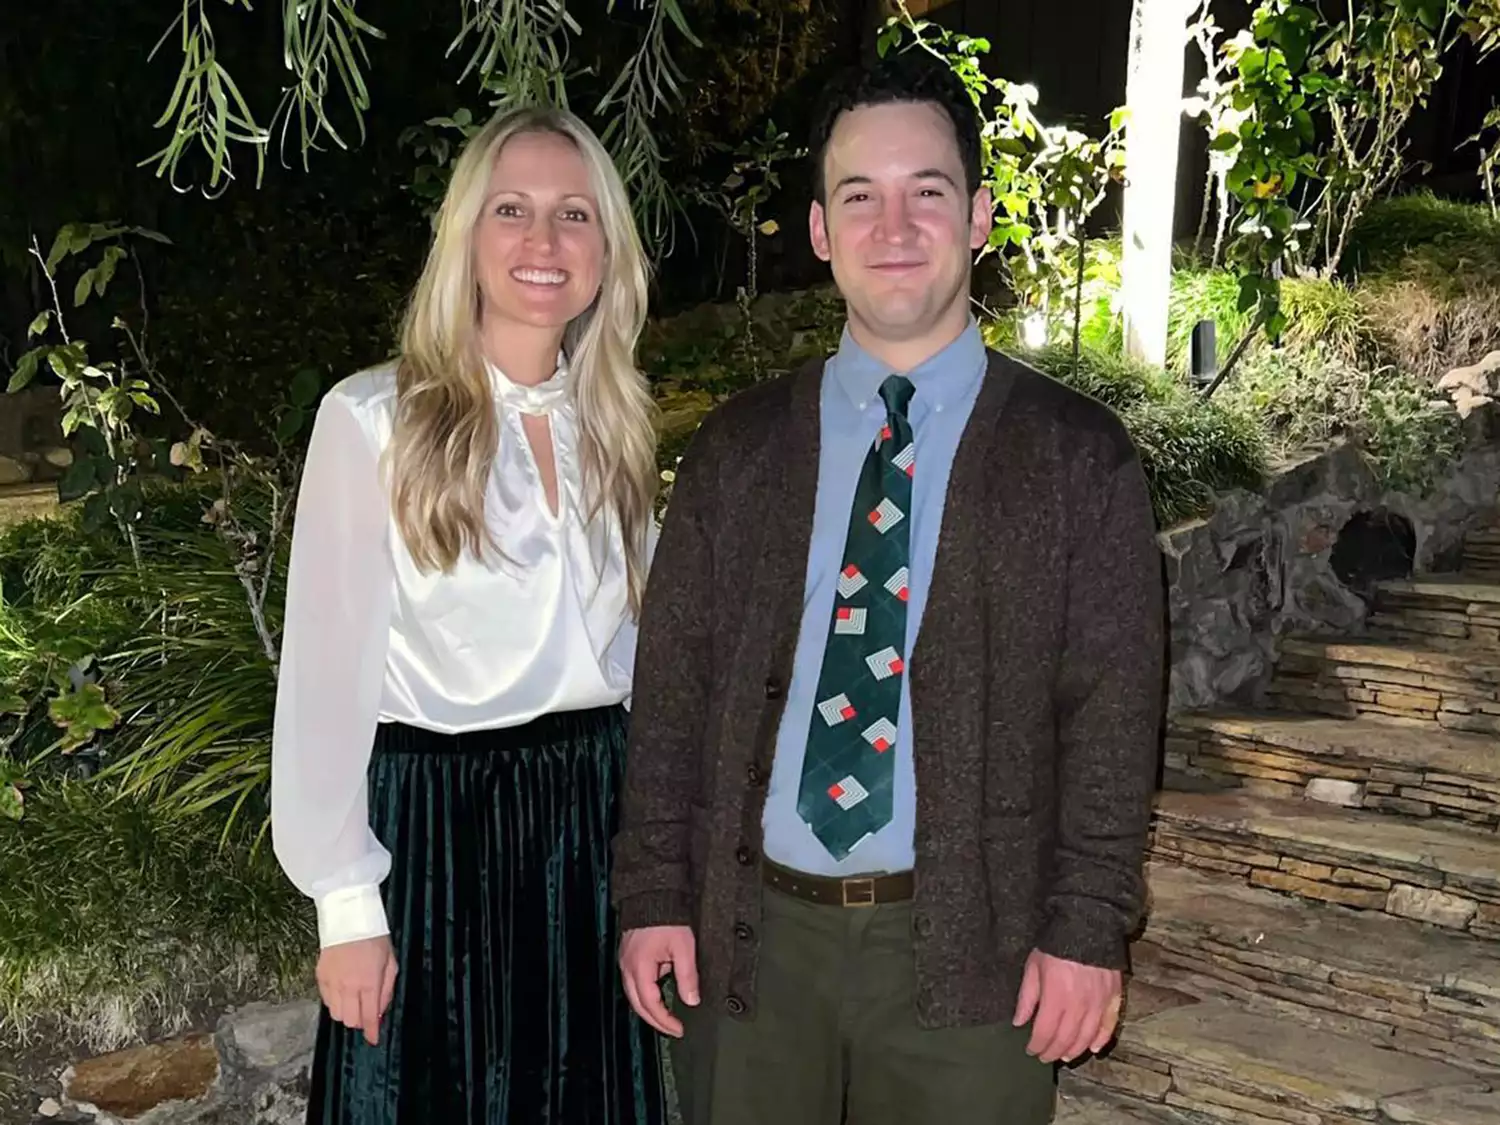 Ben Savage and his current wife began dating in 2018